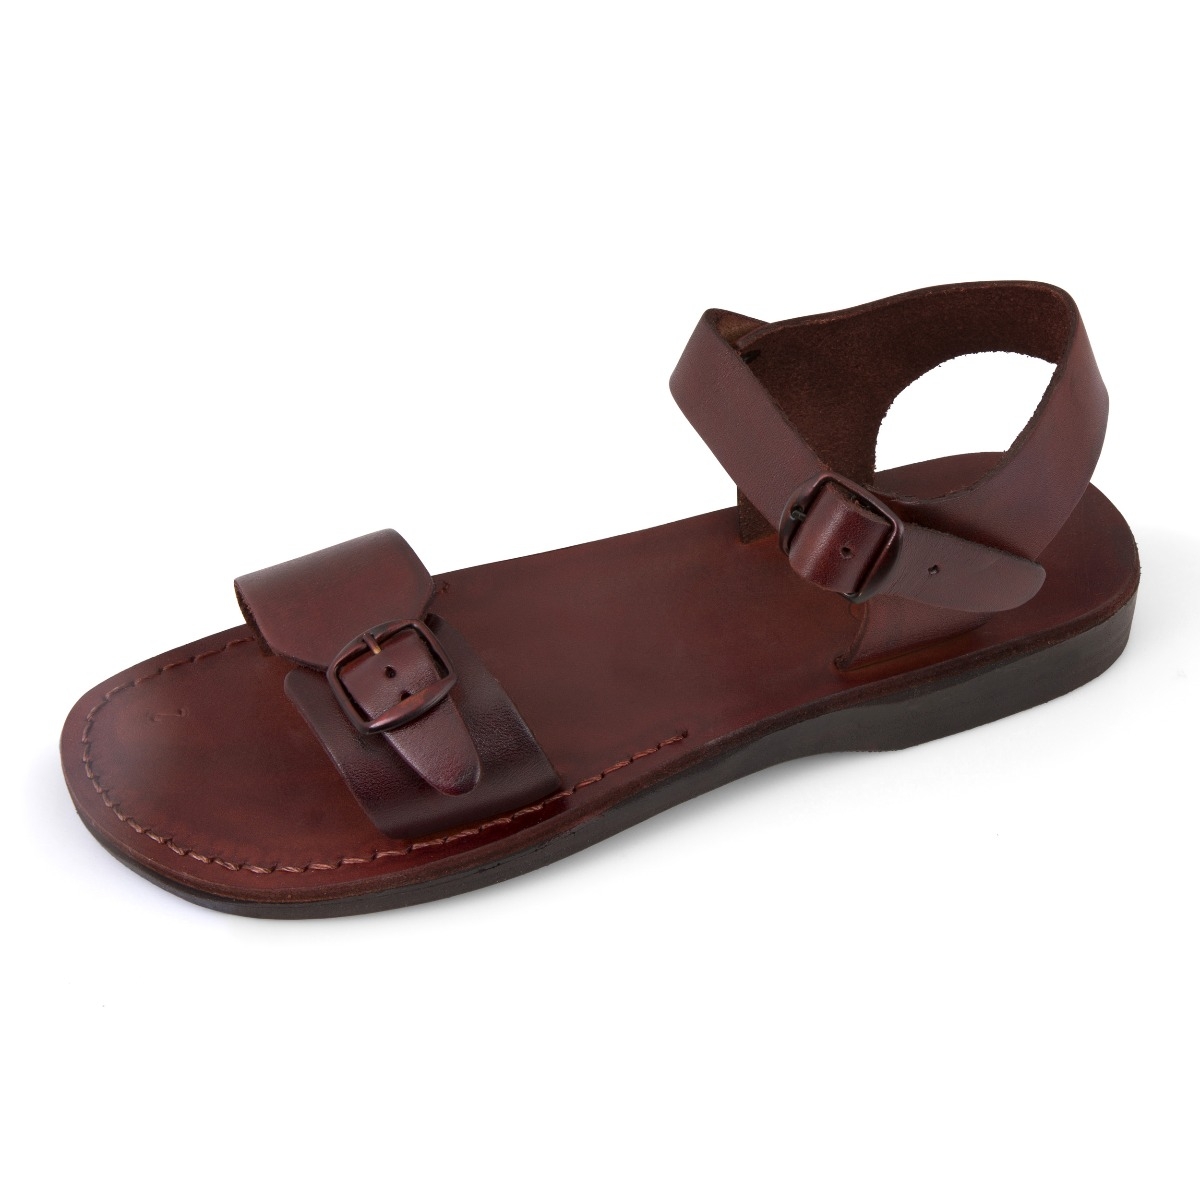 Canaan Handmade Leather Sandals (Choice of Colors) - 1